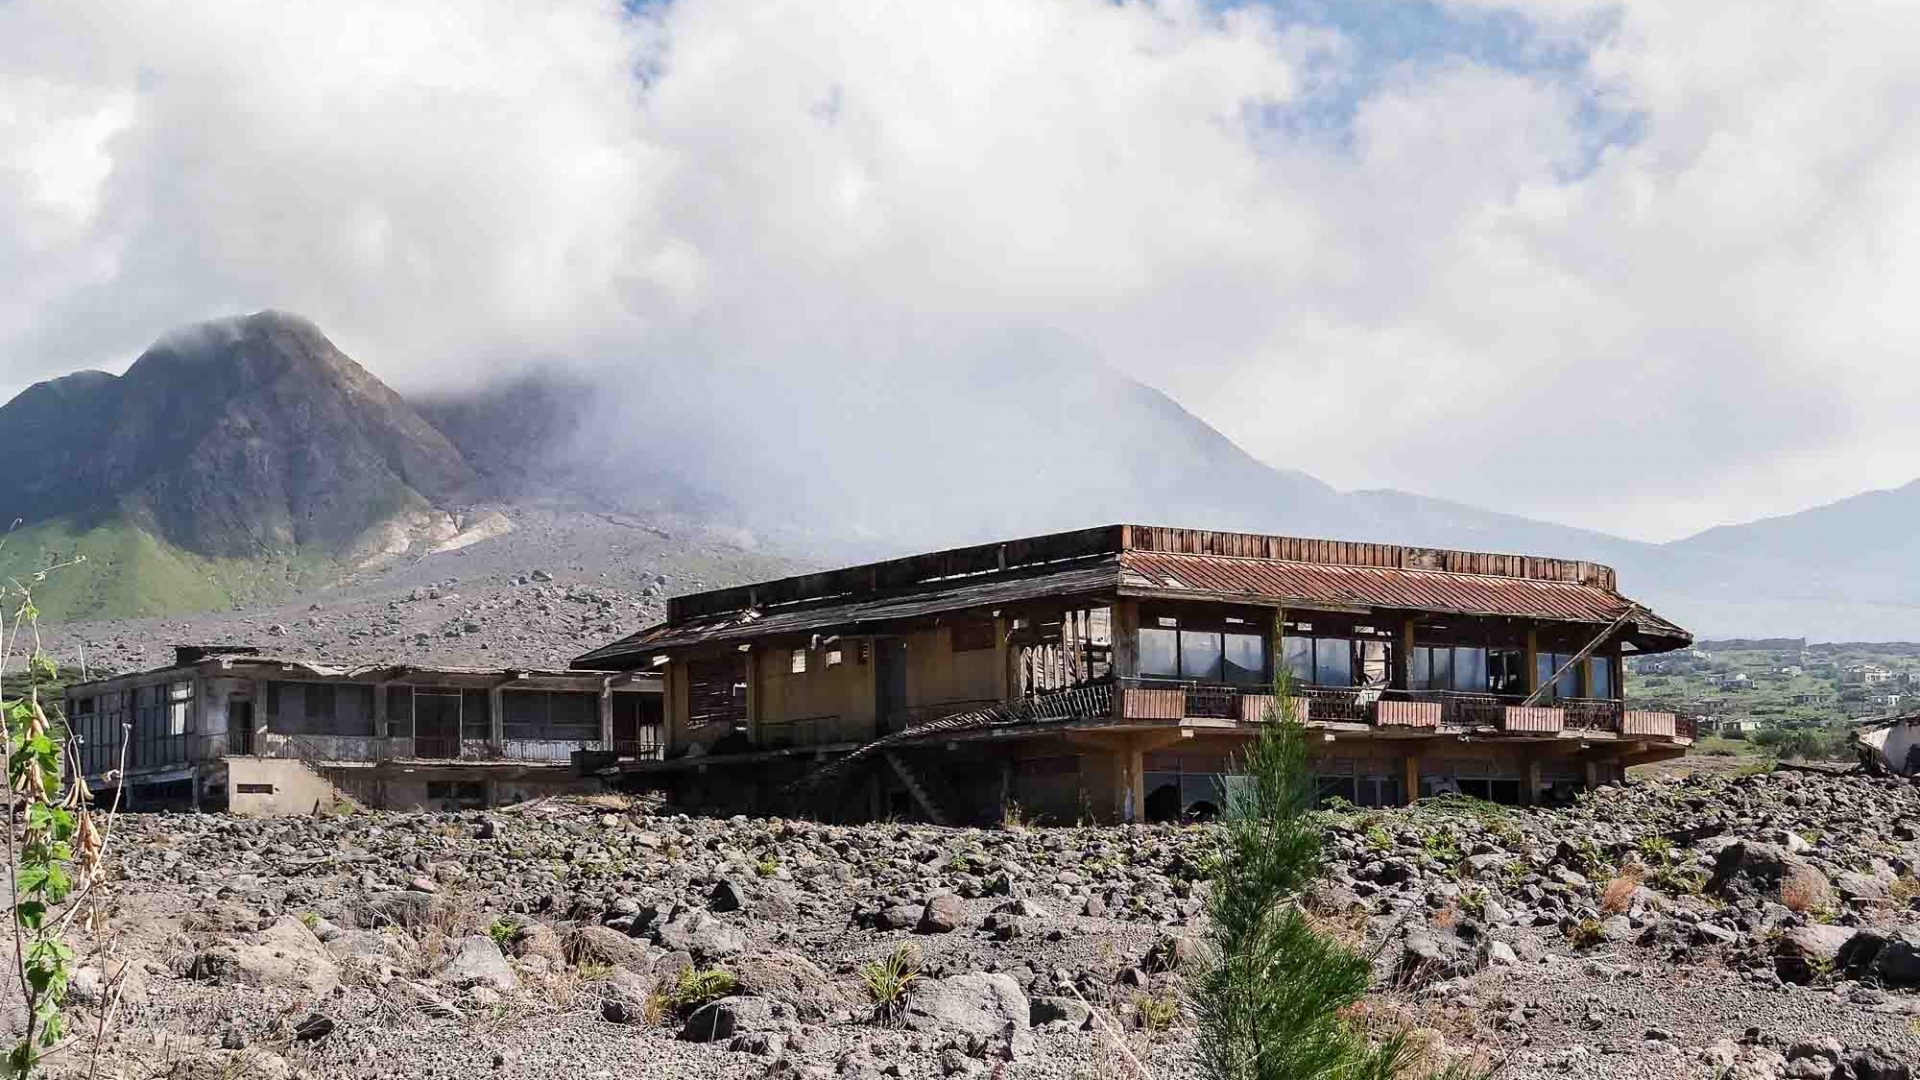 Montserrat's Soufrière Hills volcano stands behind an abandoned house in what has become known as a modern-day Pompeii.